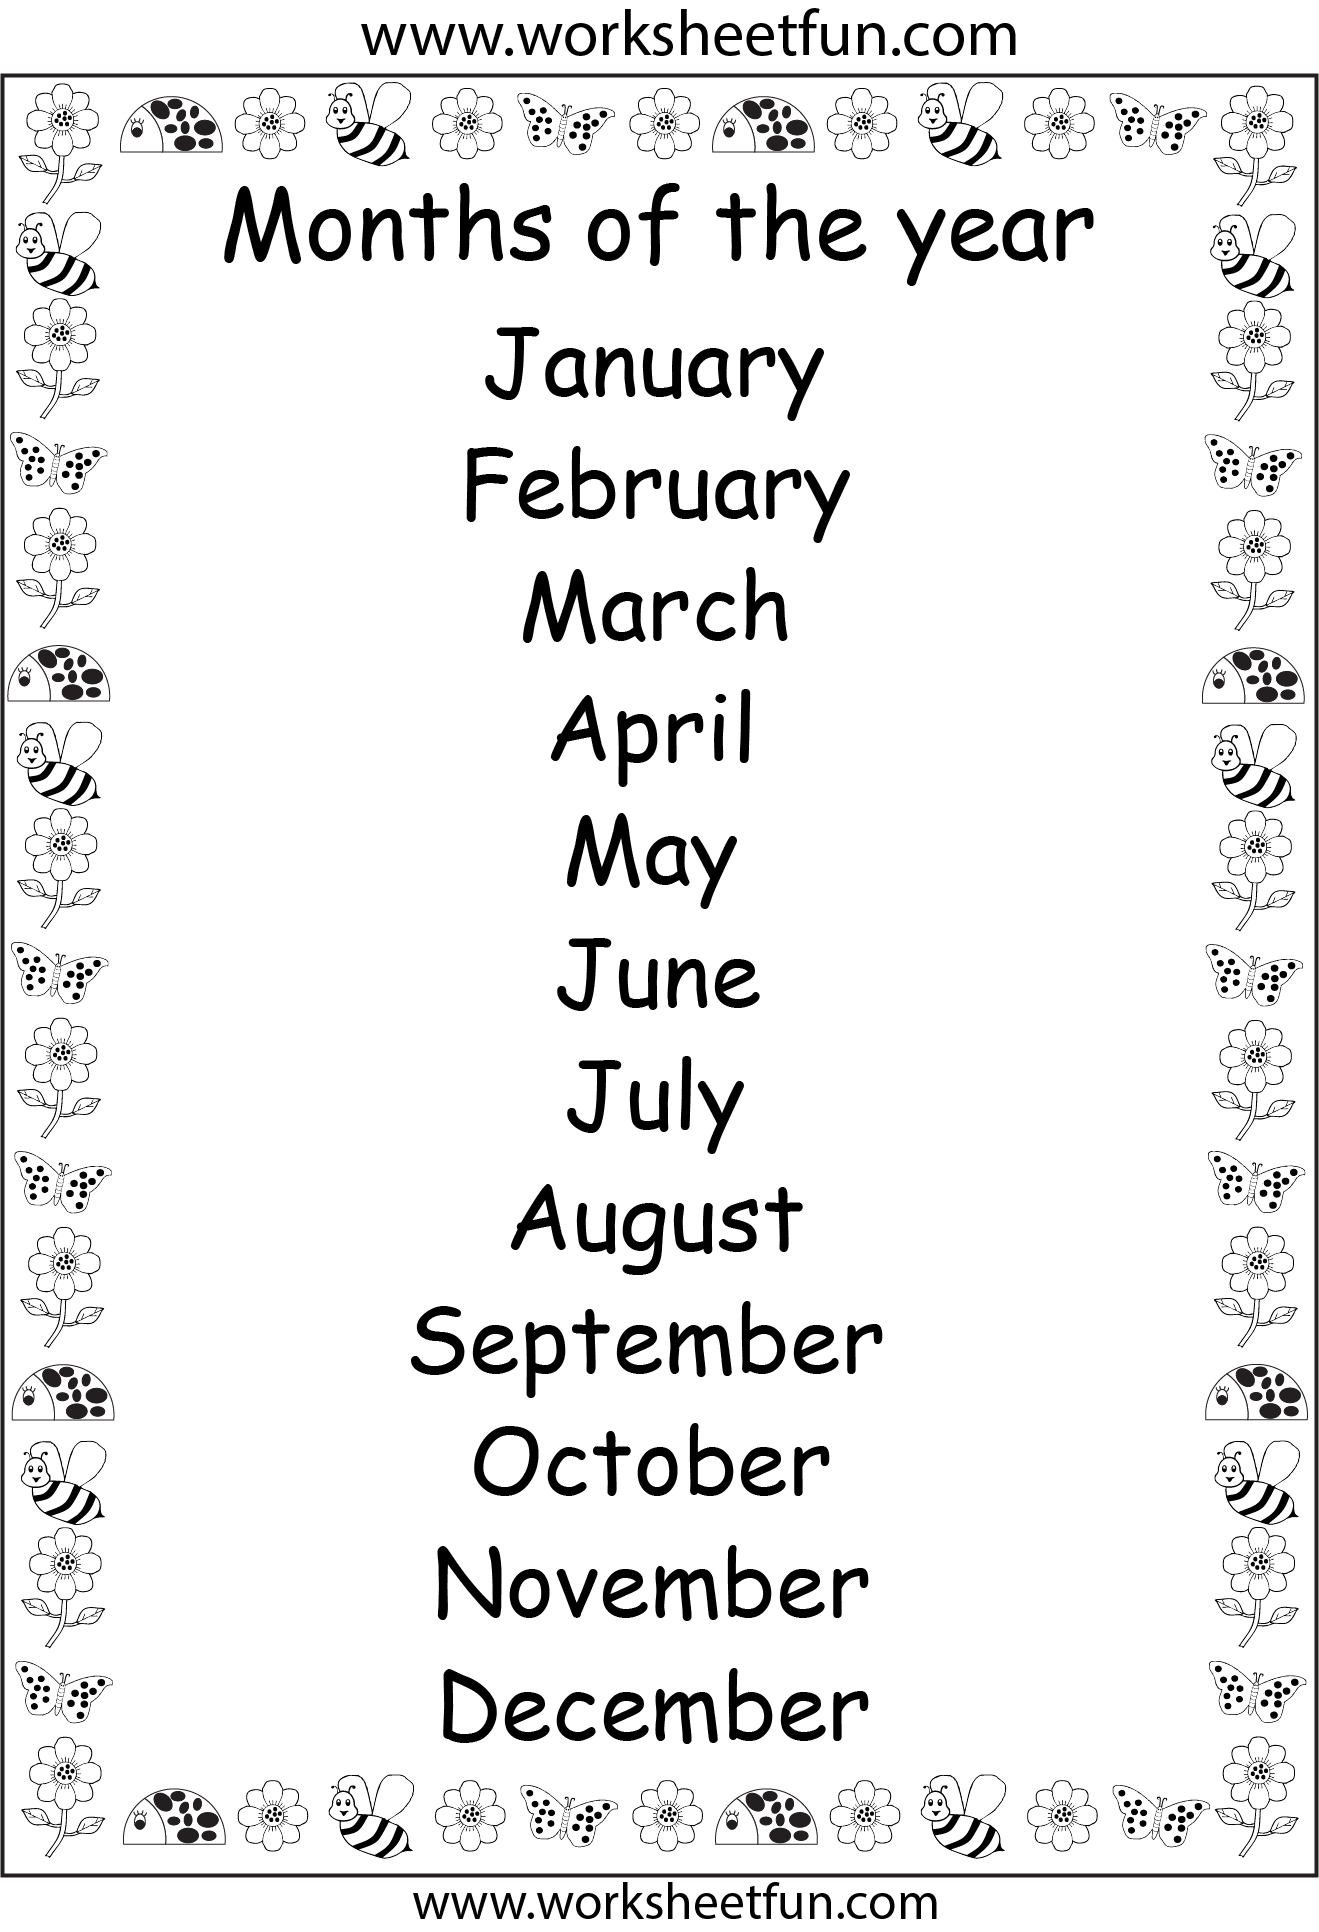 months-of-the-year-worksheets-worksheetscity